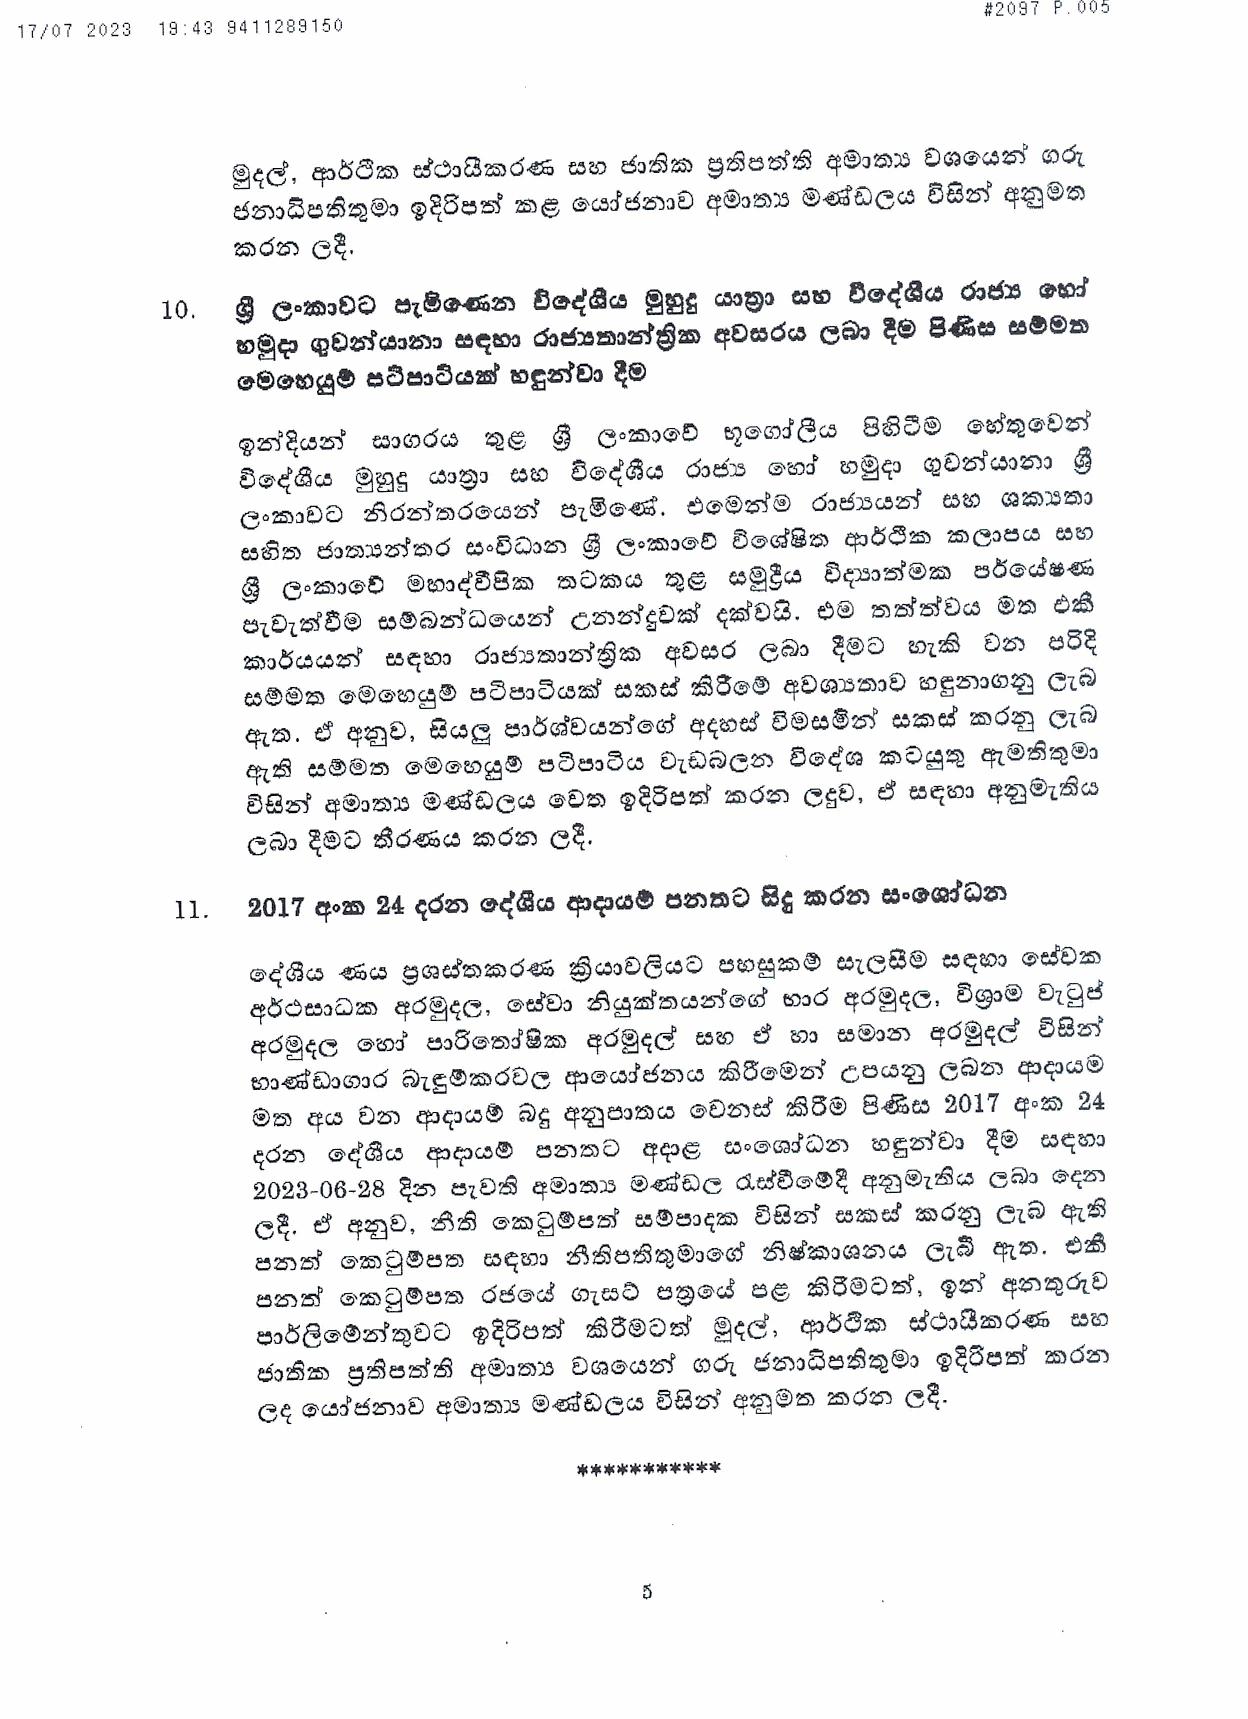 Cabinet Decision on 17.07.2023 page 005